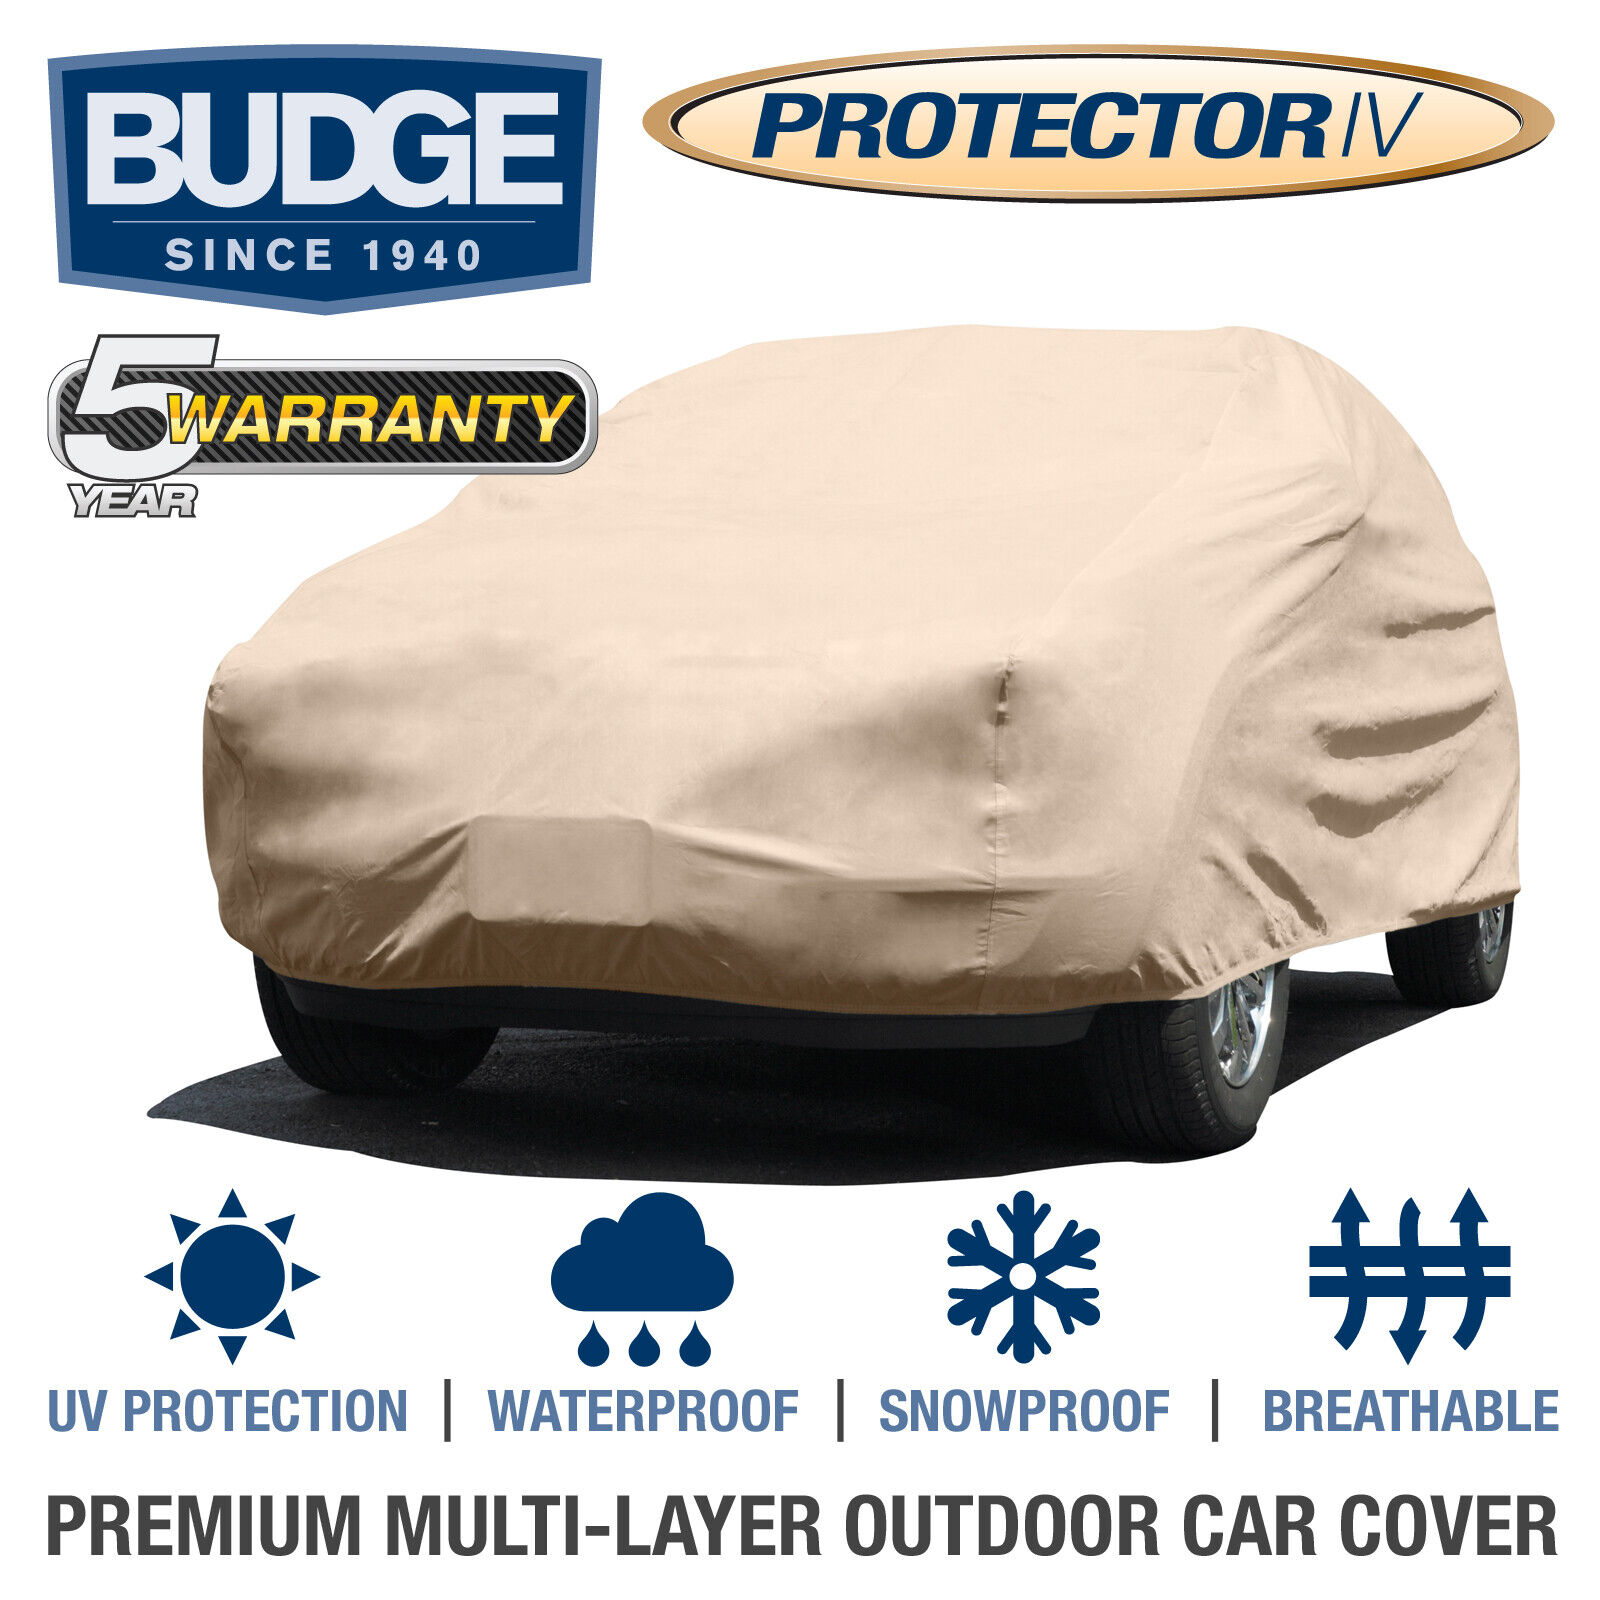 Budge Protector IV SUV Cover Fits Nissan Xterra 2008 | Waterproo